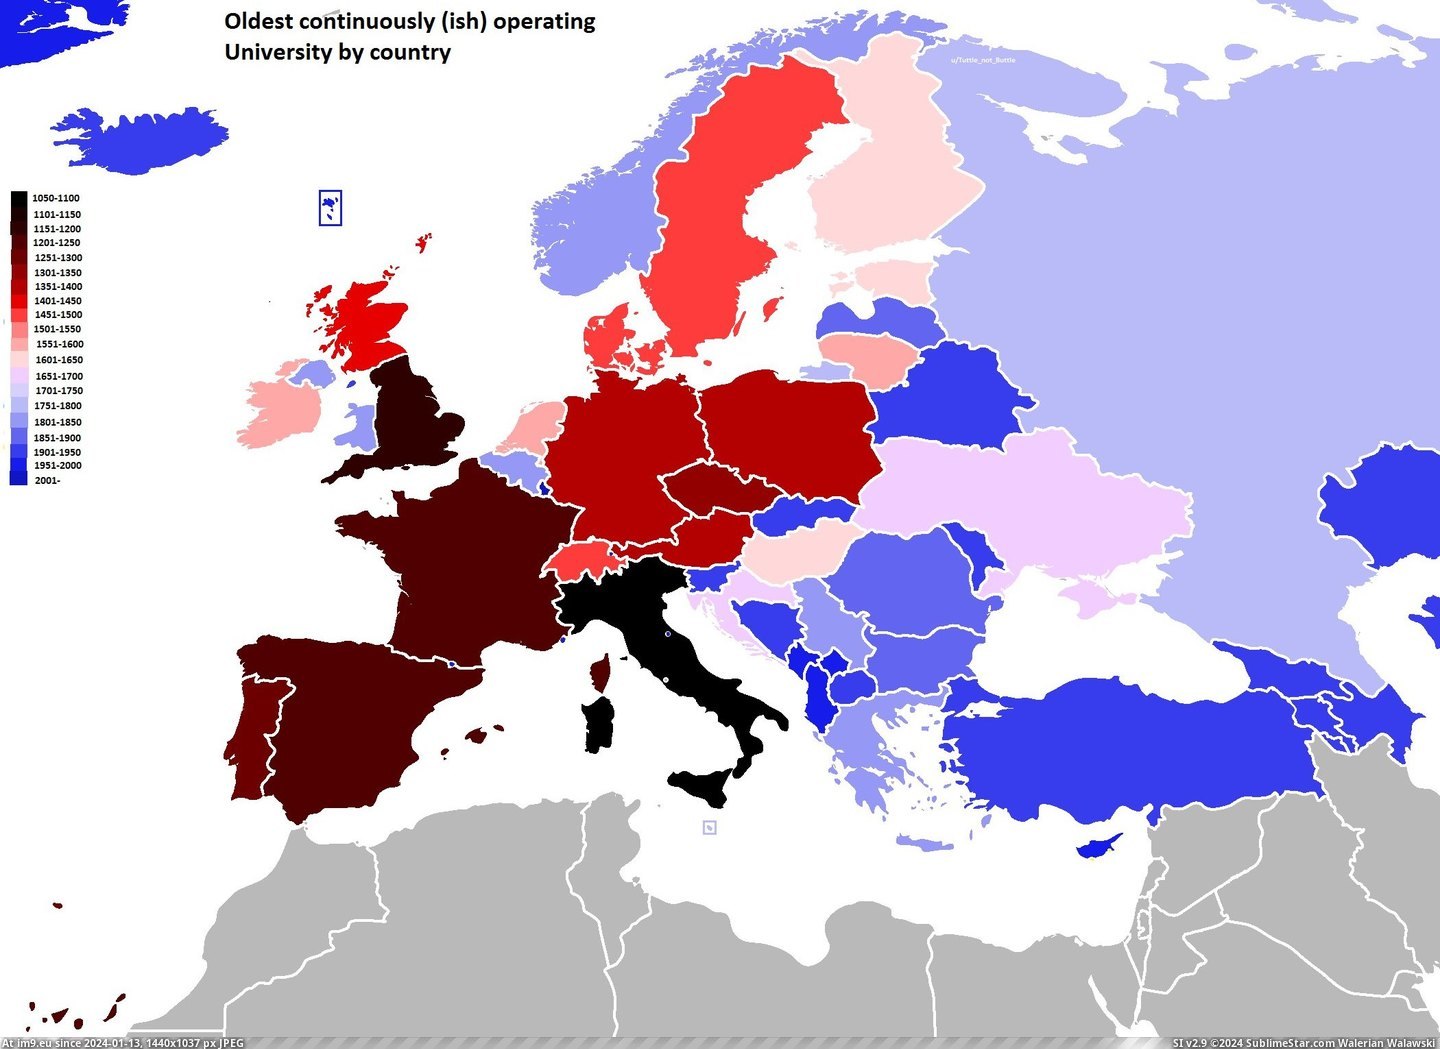 #European #Countries #University #Operating #Continuously #Oldest #2100x1525 #Establishment [Mapporn] Date of establishment of oldest continuously operating University in European countries (2100x1525) [OC] Pic. (Obraz z album My r/MAPS favs))